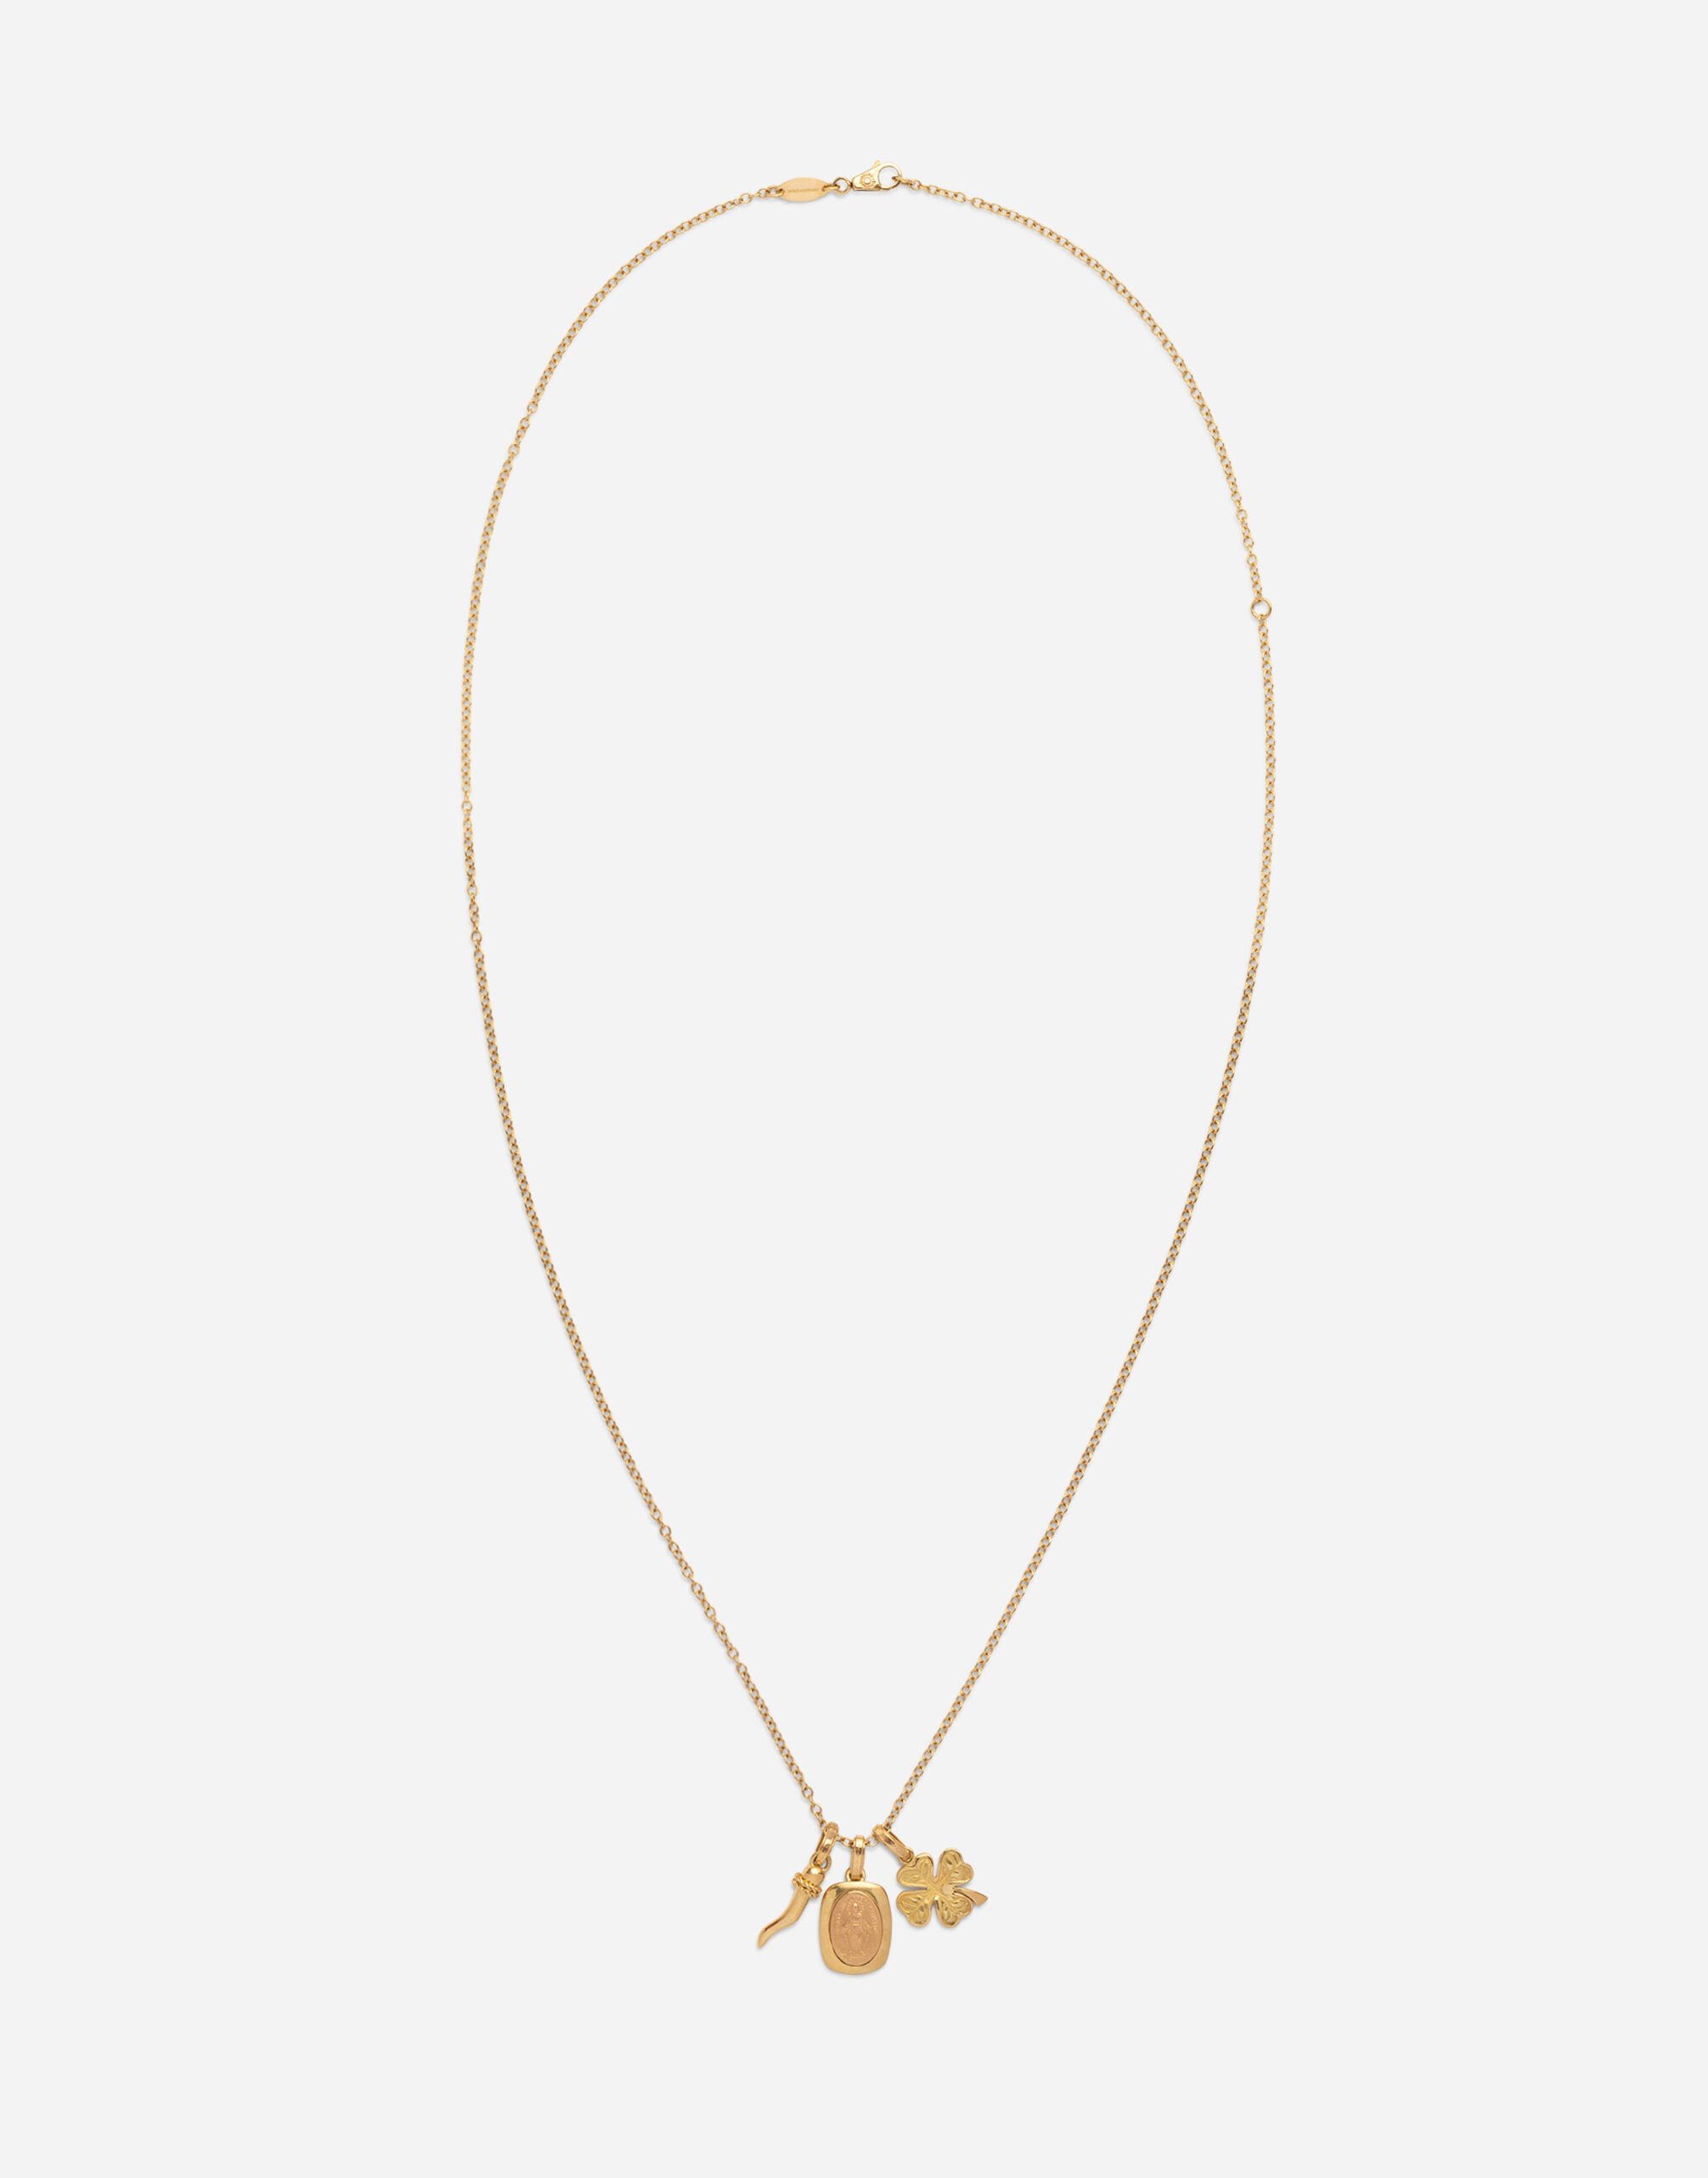 Dolce & Gabbana Devotion yellow and red gold rounded rectangular pendant with a red gold Virgin Mary medallion, horn and four-leaf clover pendants on yellow gold chain Gold and shiny black VG2277VM287